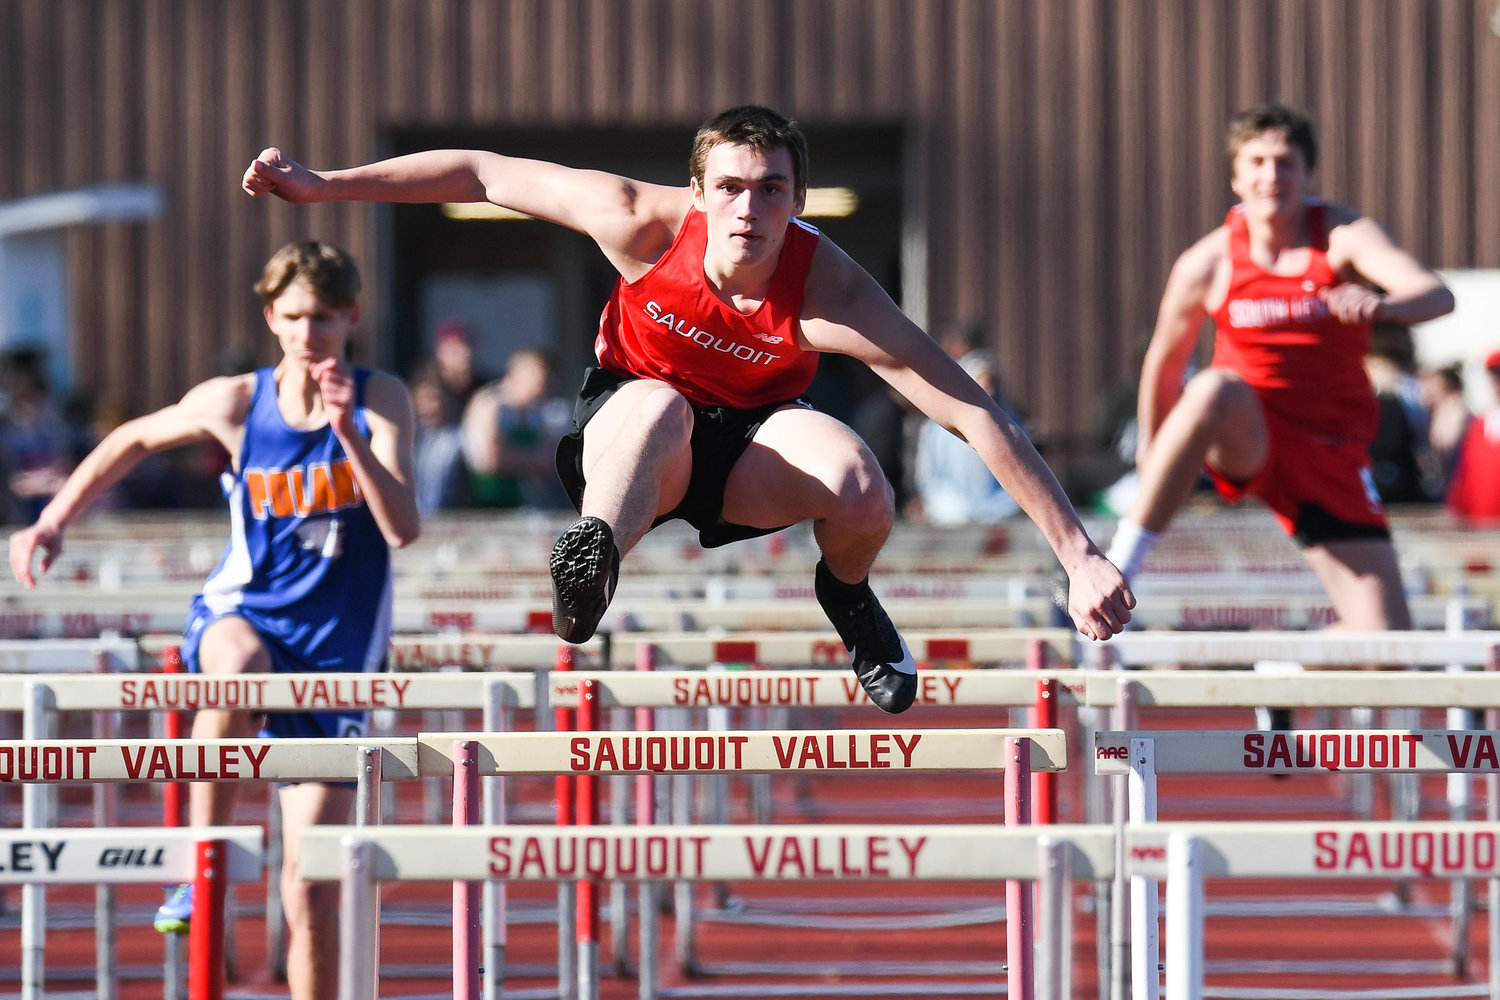 Sauquoit Valley's Brenden Lee competes in boys 110-meter hurdles during the Cahill Classic on Friday at Sauquoit Valley High School.